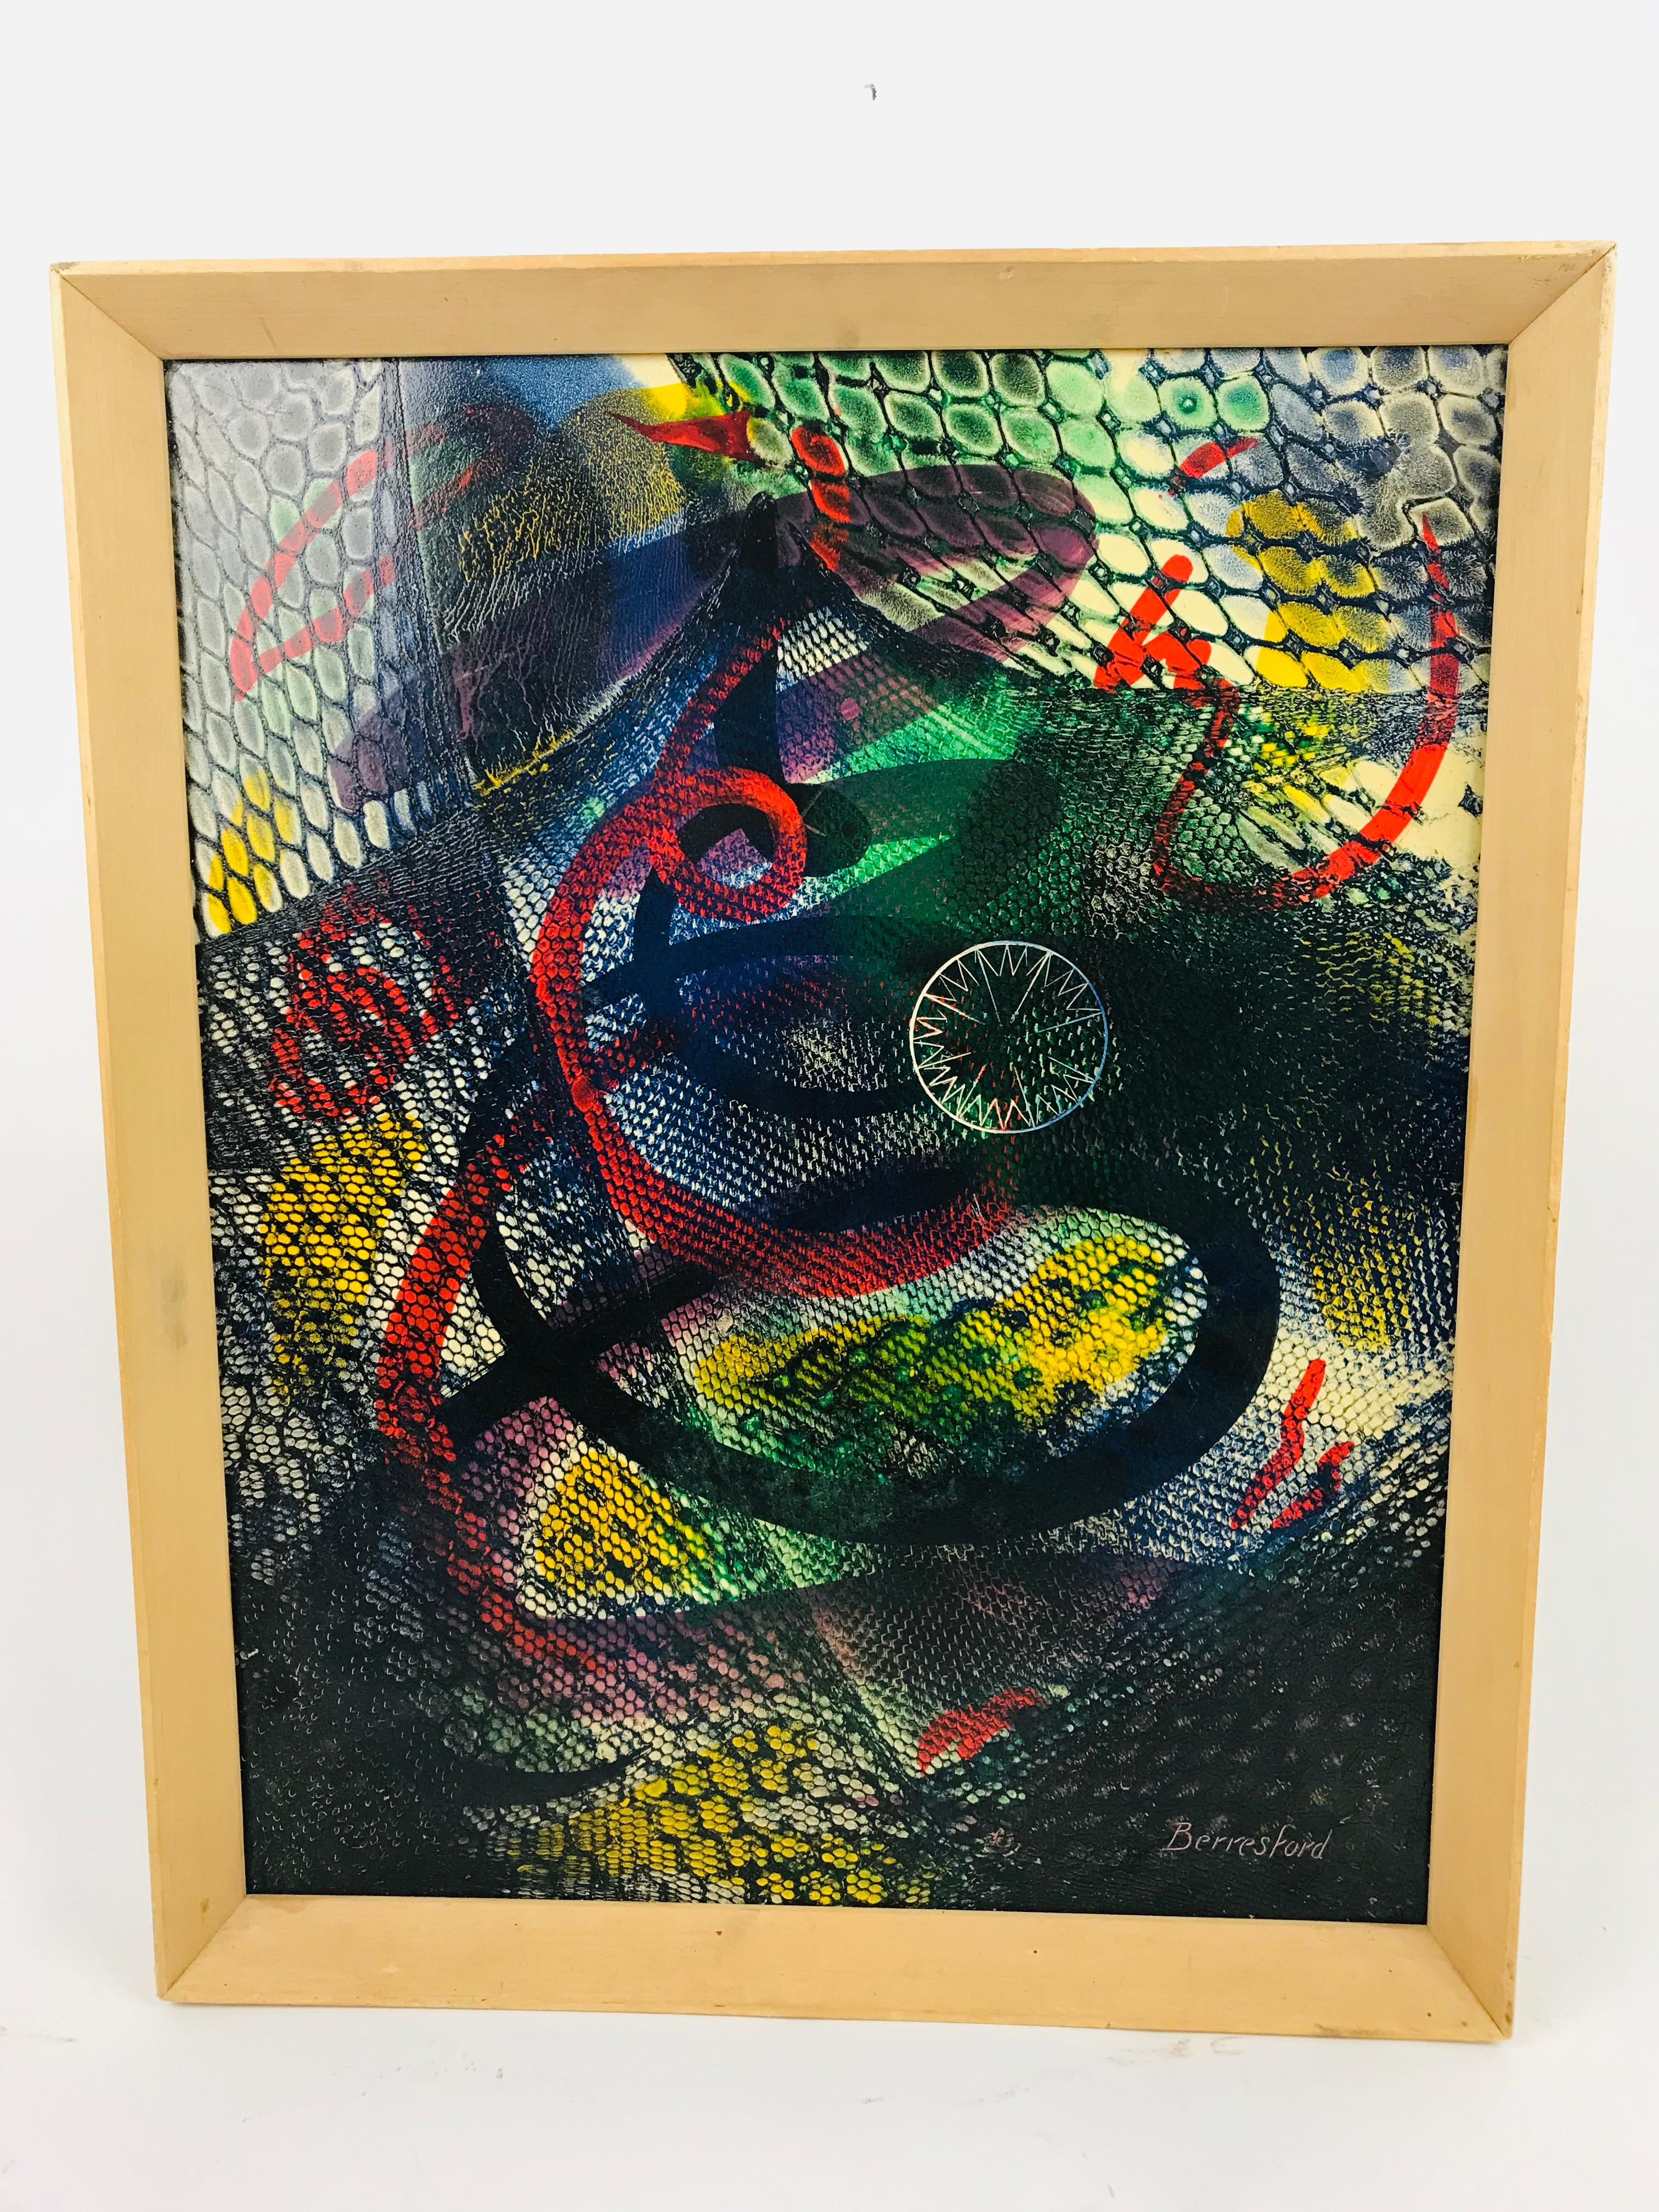 An immaculate oil on board by artist Virginia Berresford. This is a mind bending illusion of color and geometric patterns. With the color and texture of a psychedelic snake skin this one is sure to take you on a trip and it might be venomous. The